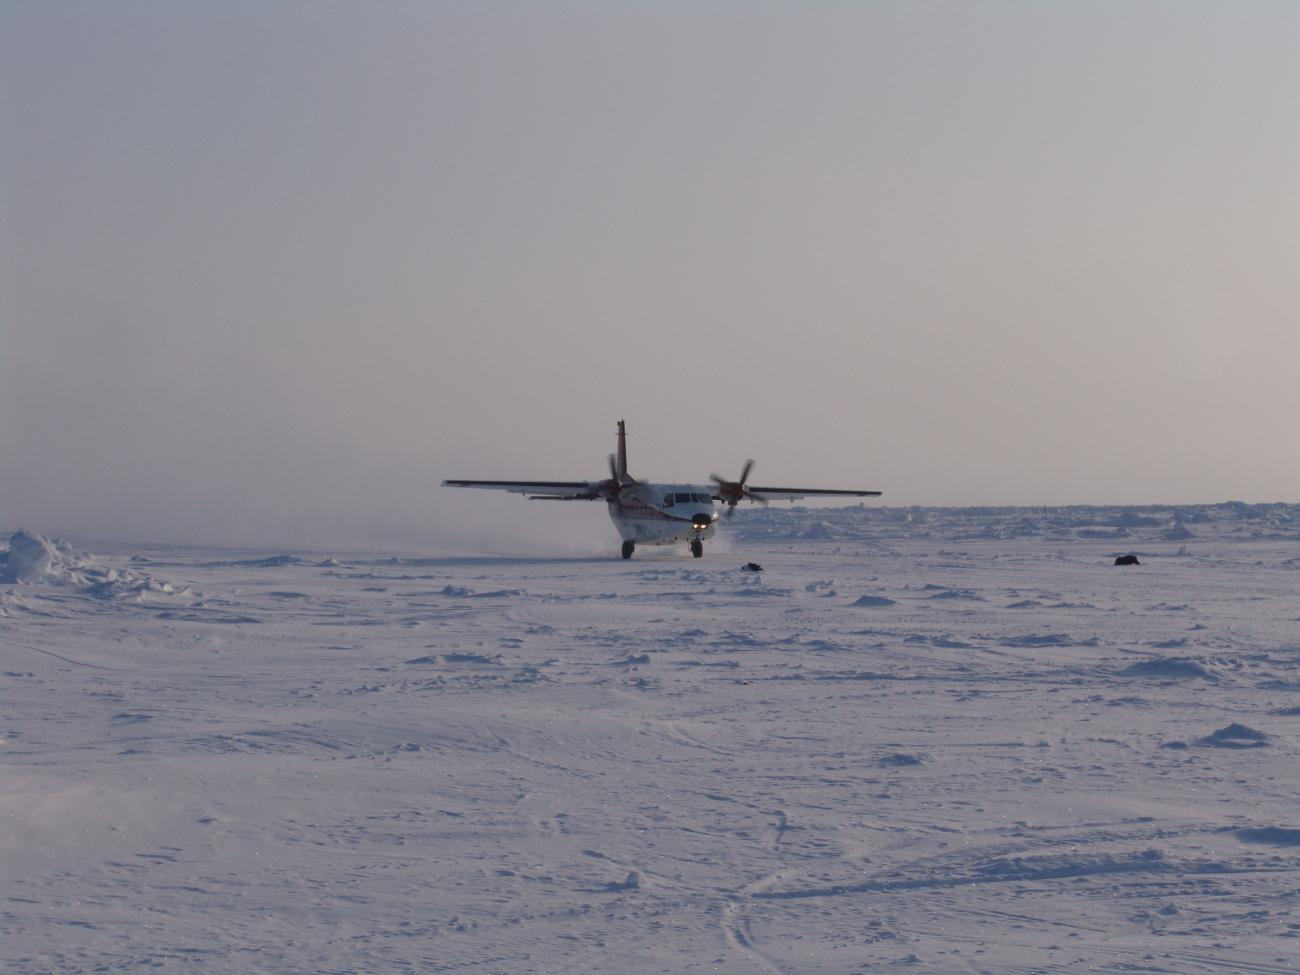 Aircraft landing on the ice